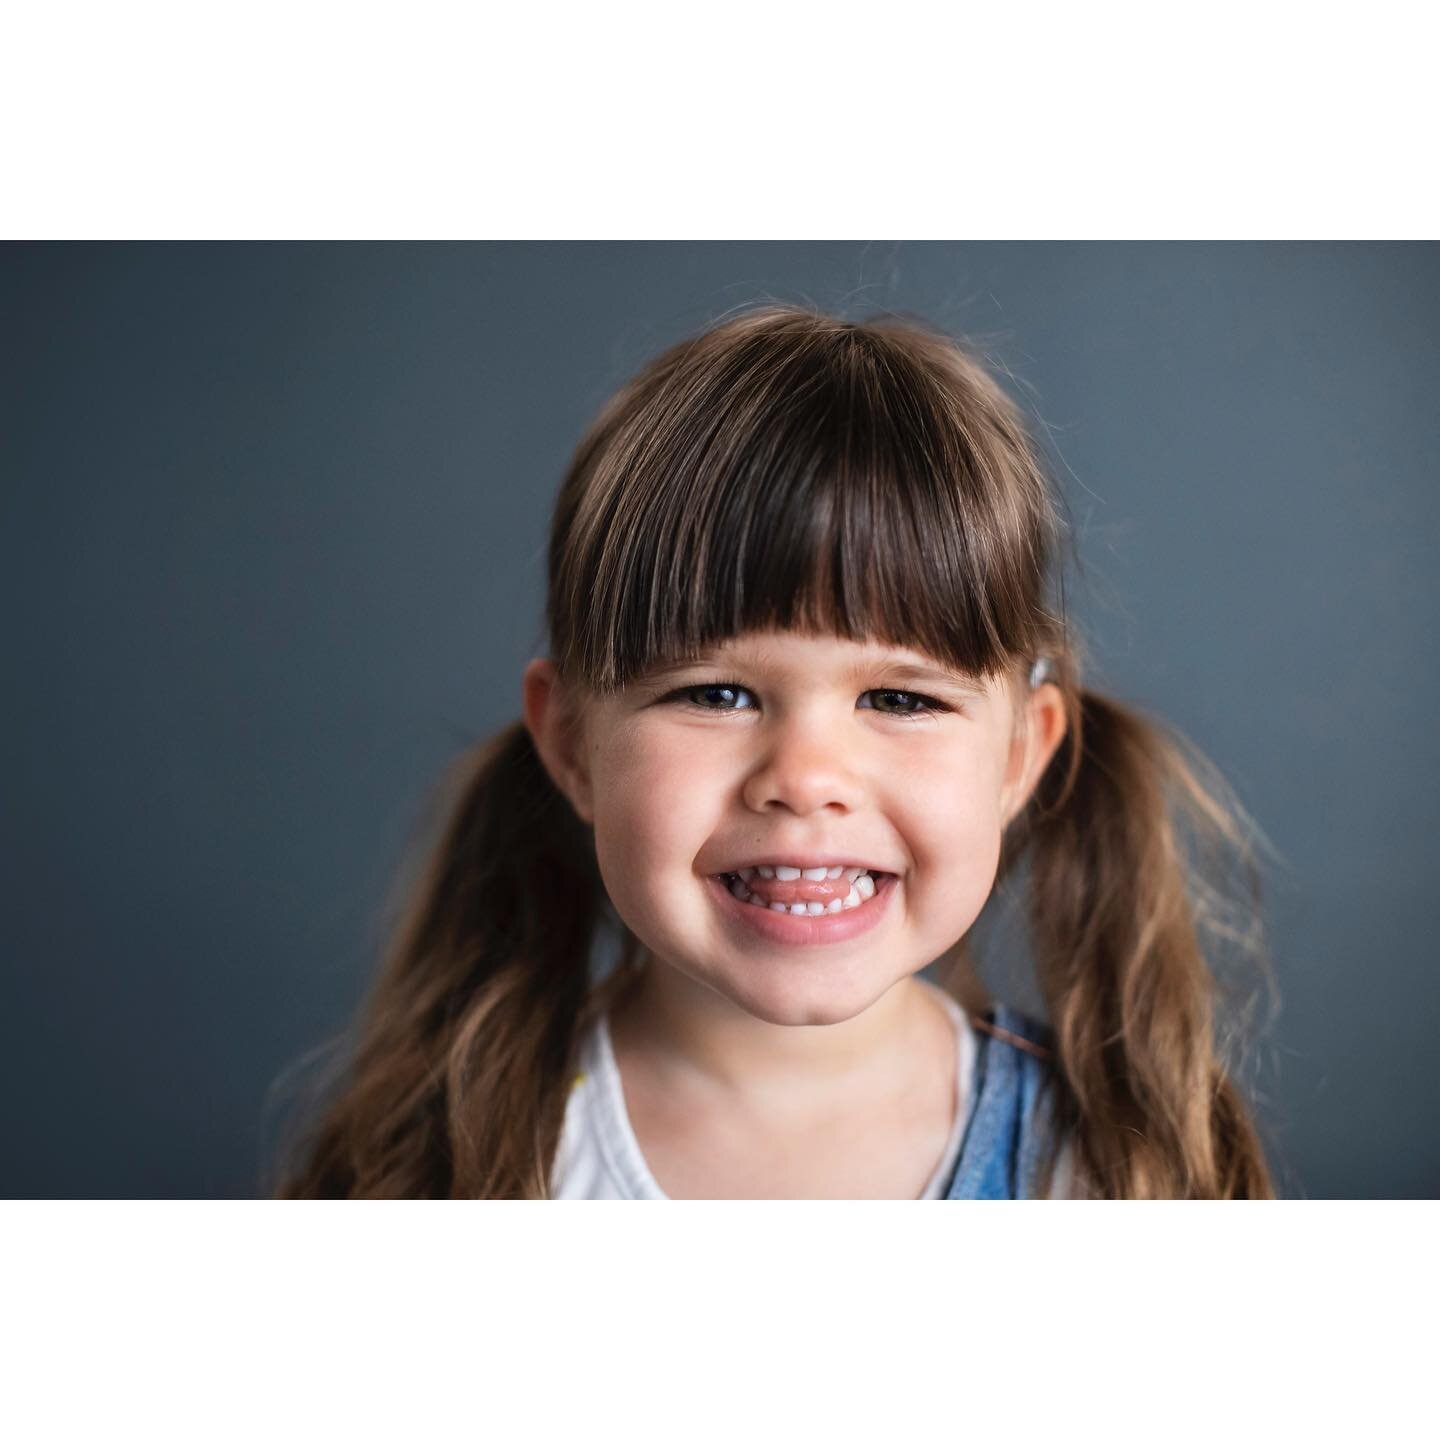 Ok, so your school already had their
picture day in the fall. But what about spring pictures?
Schools, right now is a great time to offer something a little &quot;different&quot; to your families. These portraits are a fresh and fun approach school p